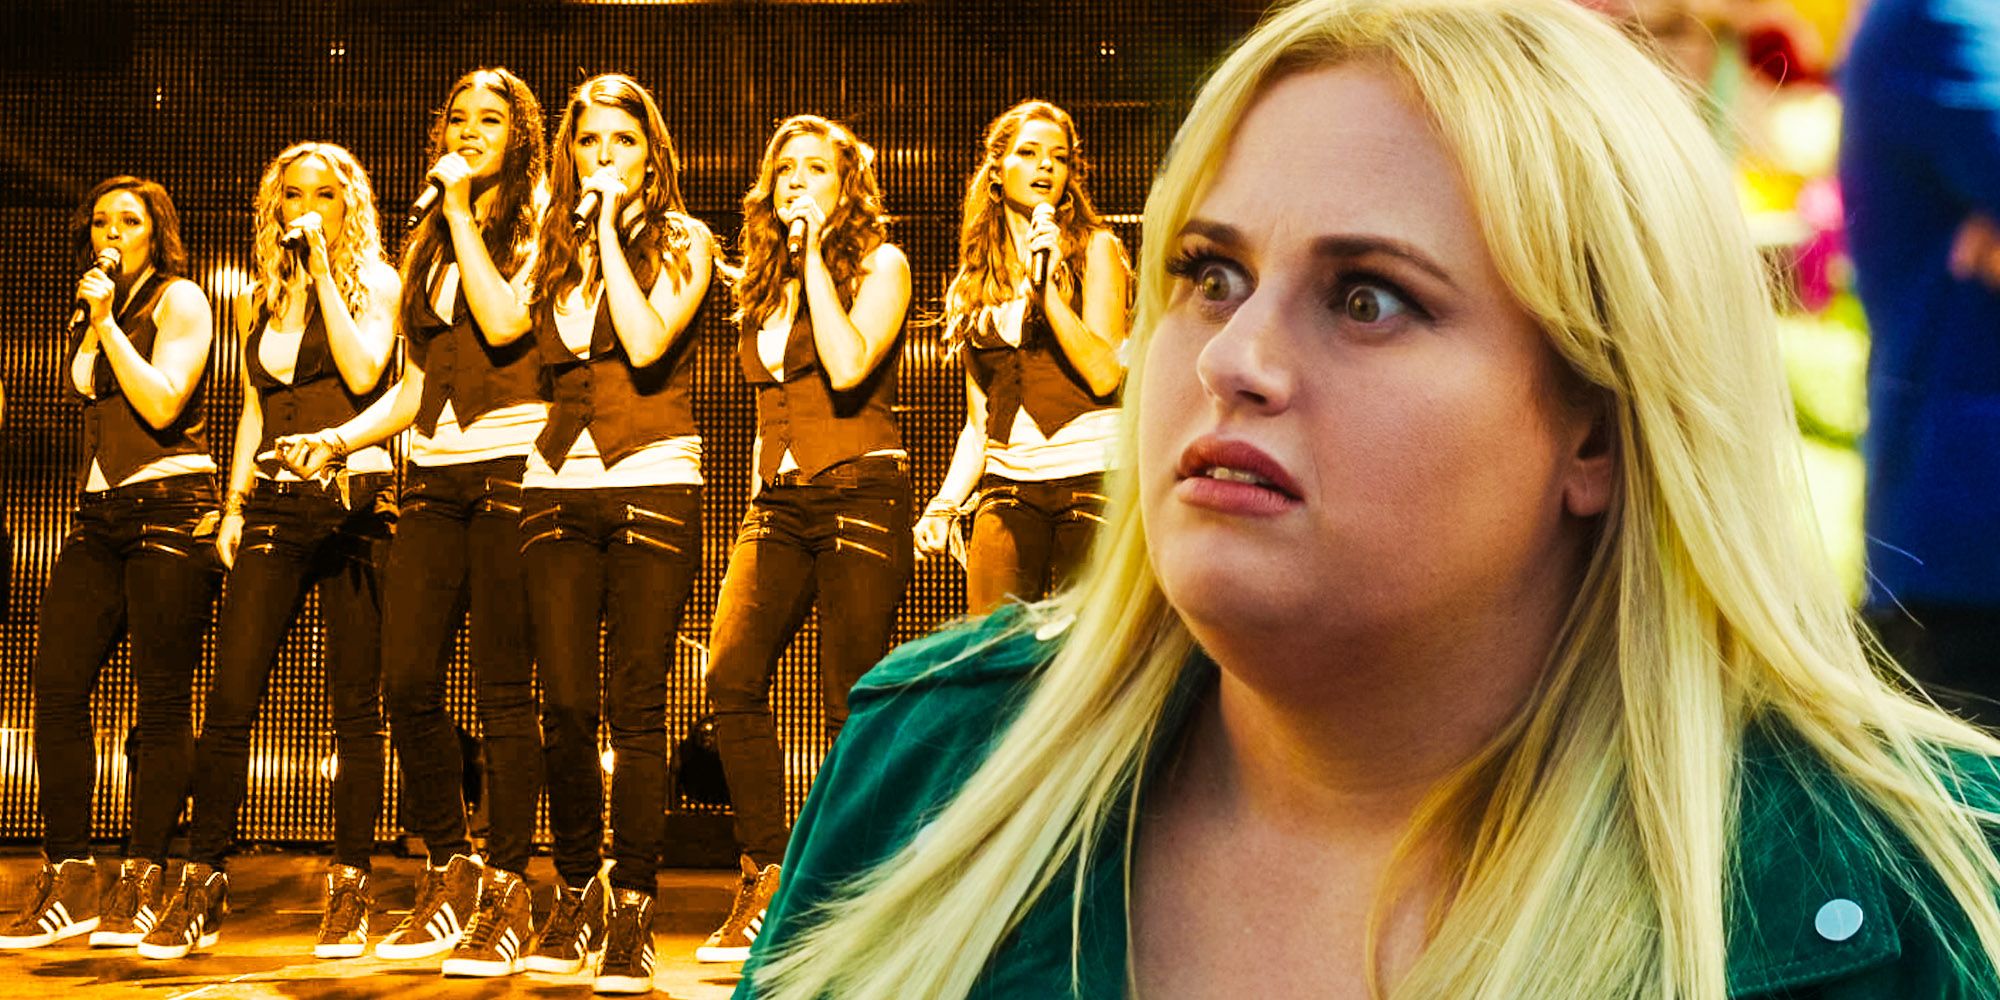 A blended image features Rebel Wilson as Amy and the rest of the Barden Bellas behind her in Pitch Perfect 3